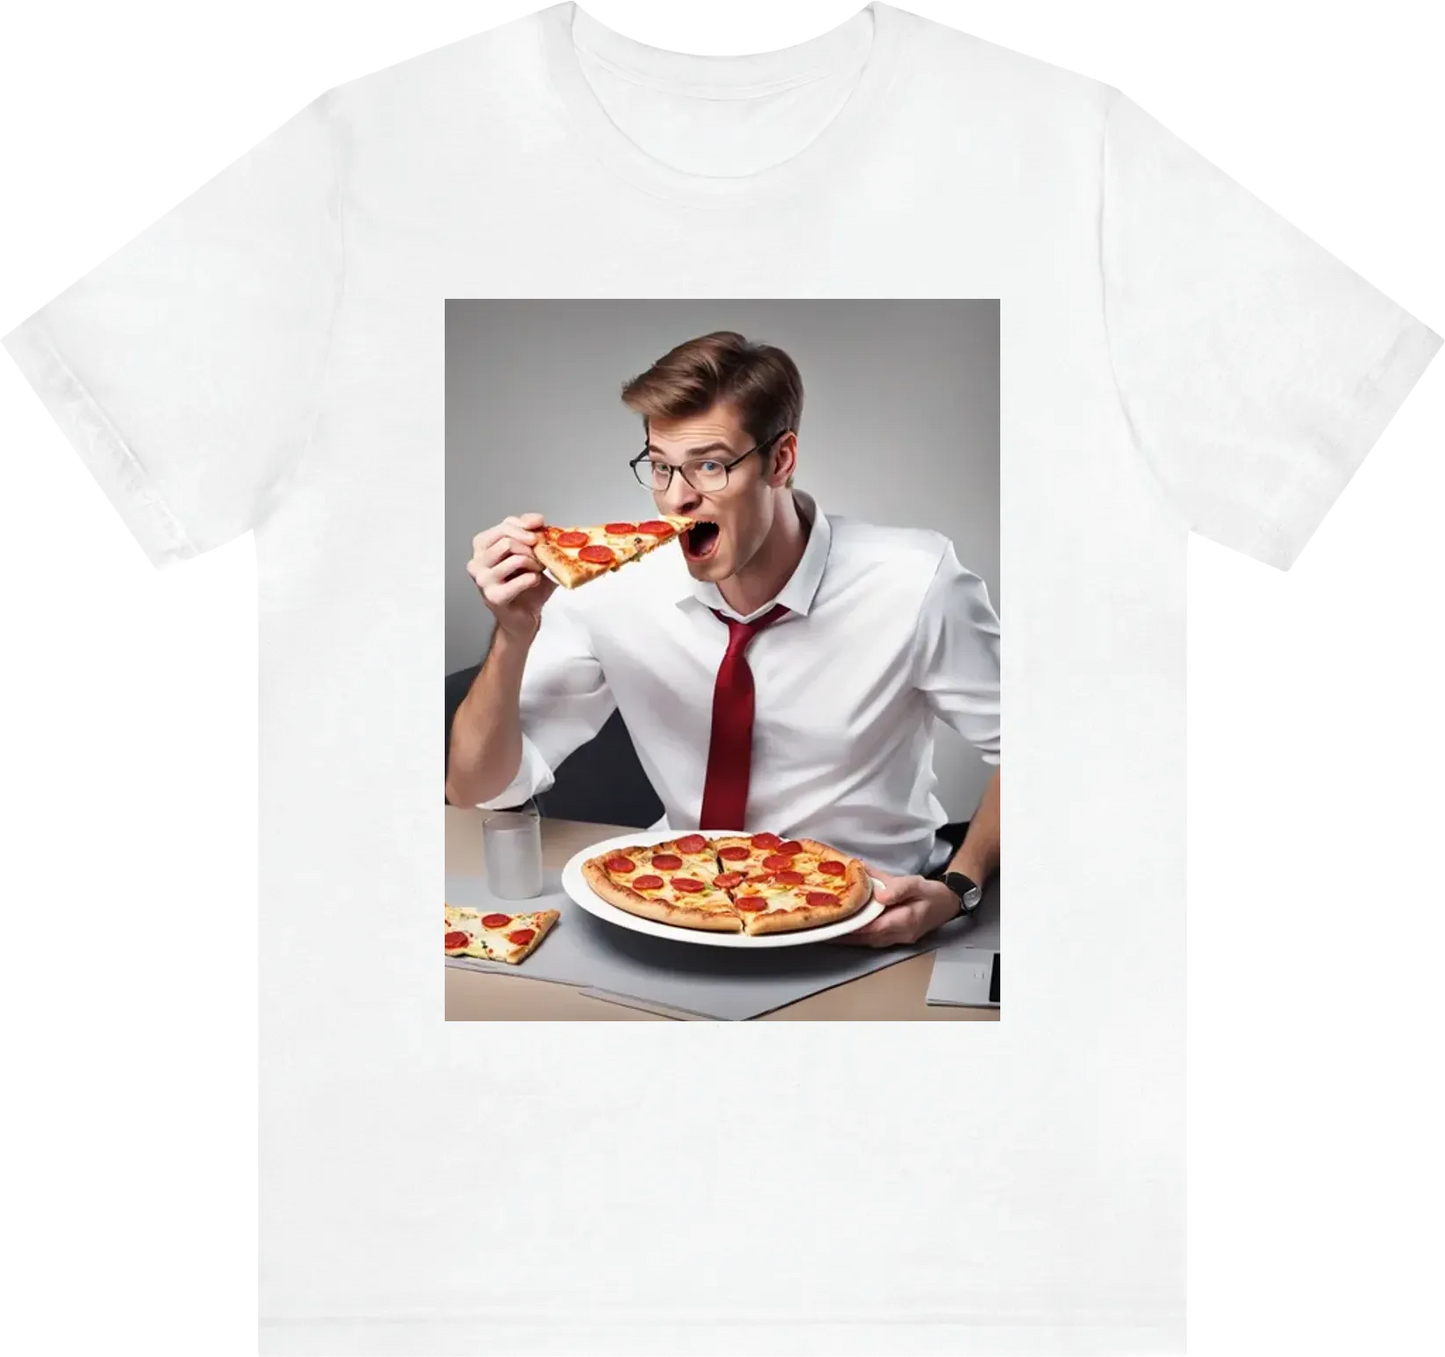 Corporate guy eating pizza